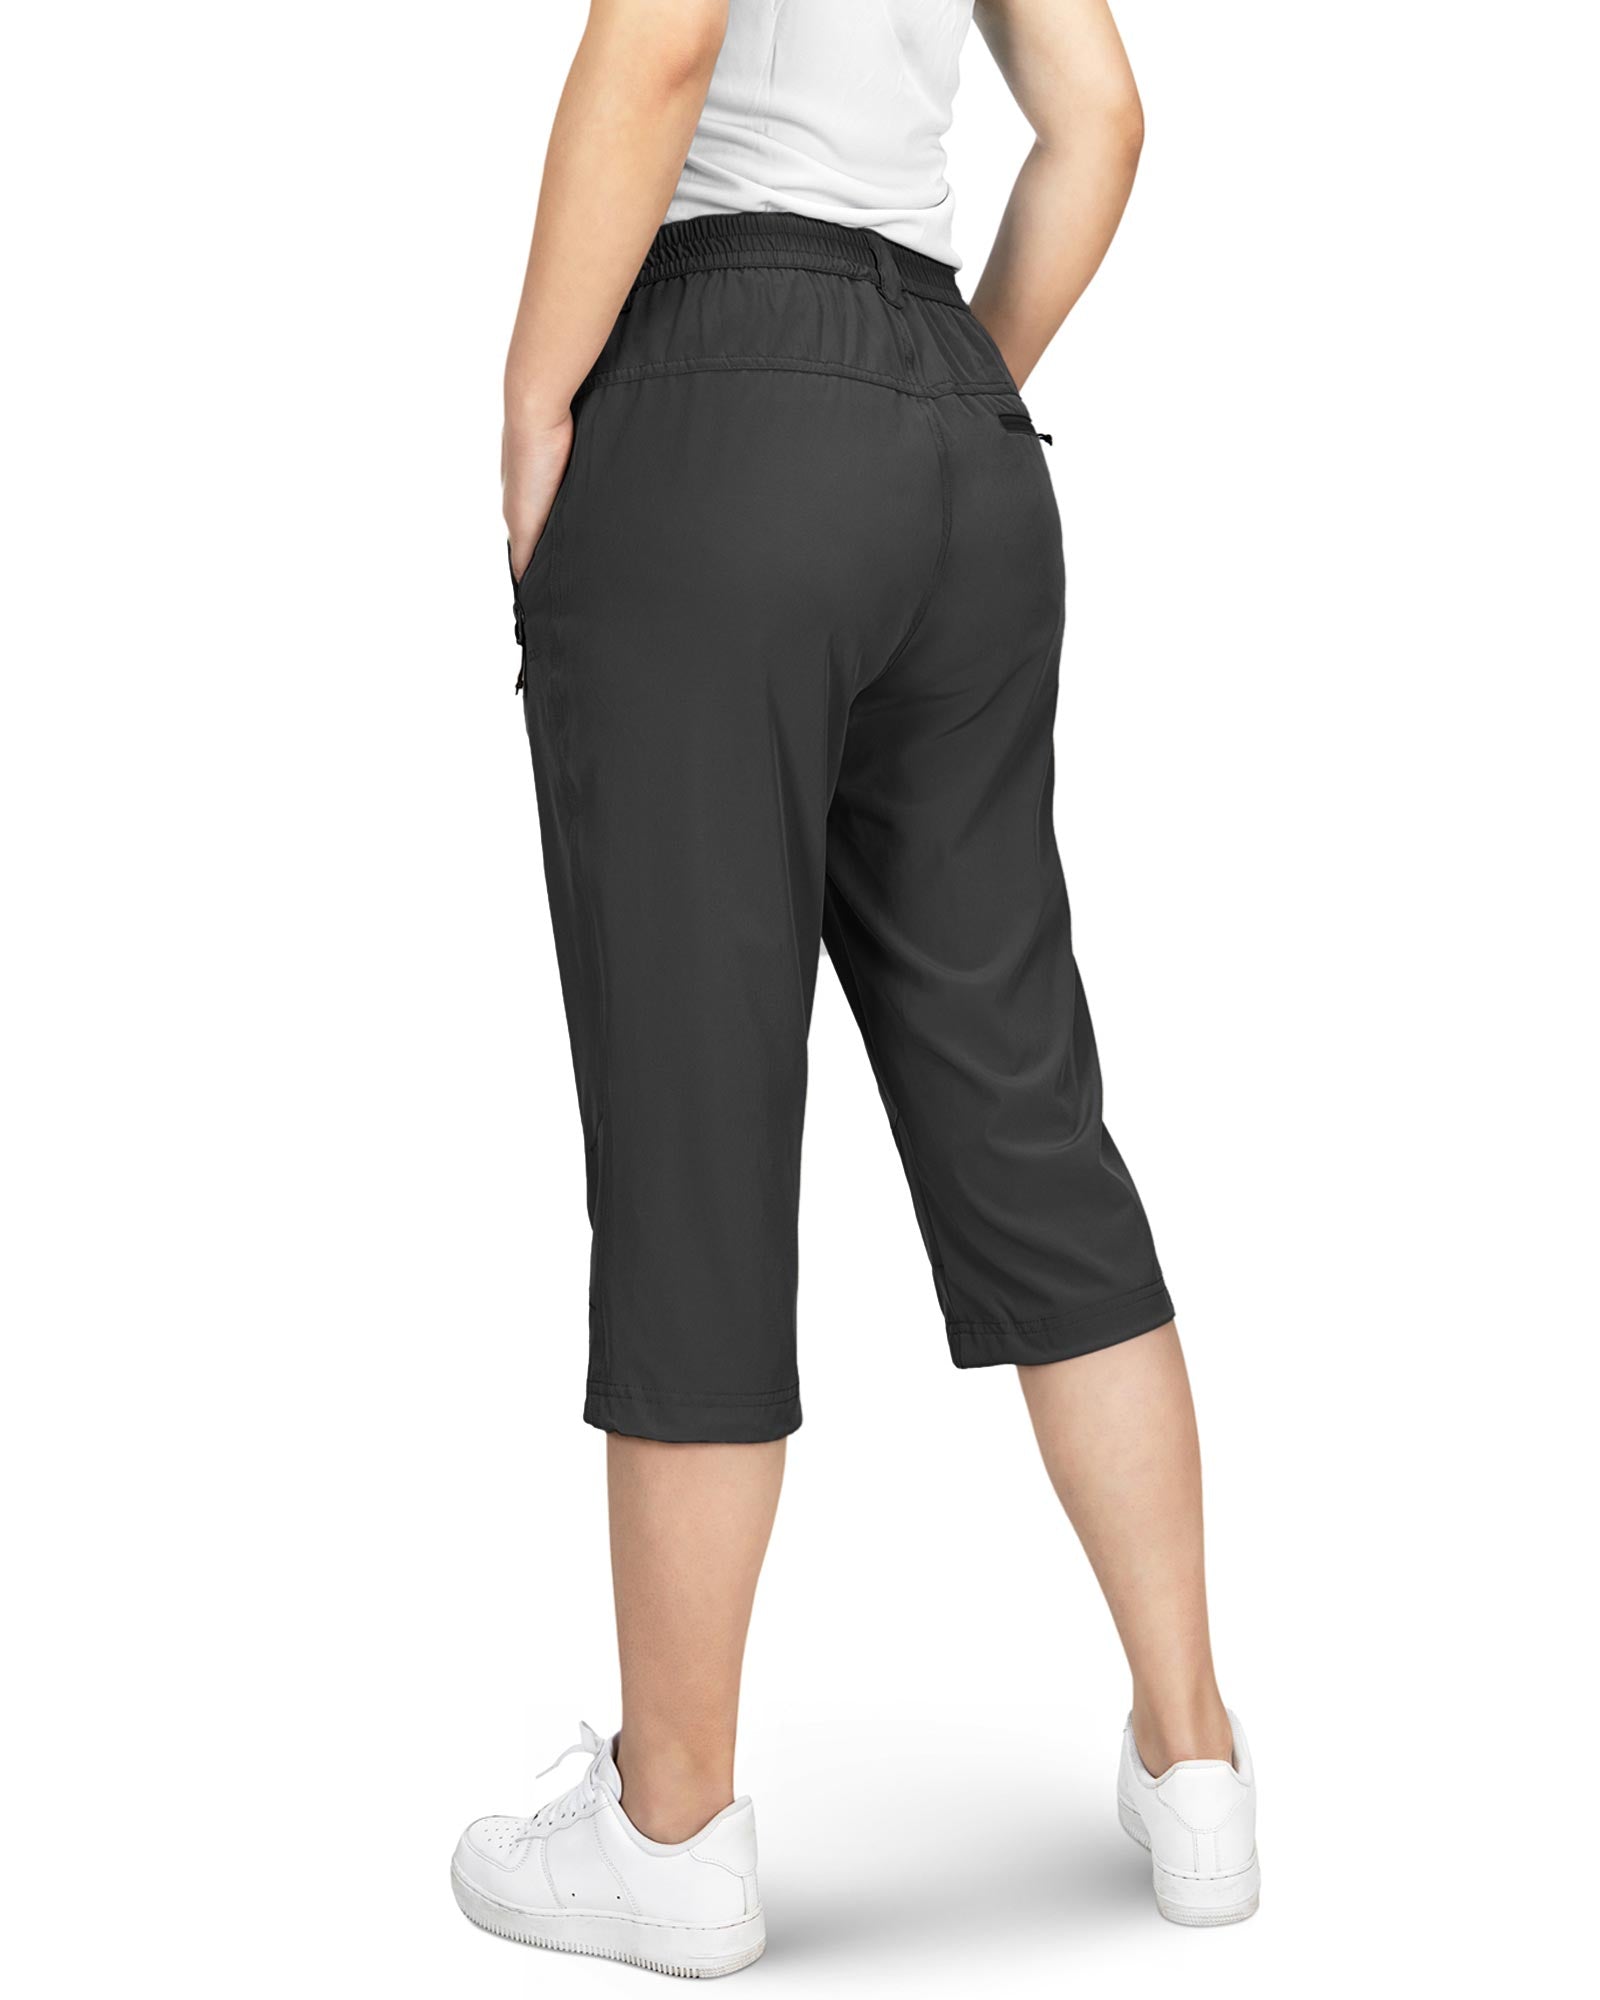 33,000ft Women's Capri Golf Pants Casual Quick Dry UPF 50+ Lightweight  Stretch Cargo Hiking Pants with Pockets